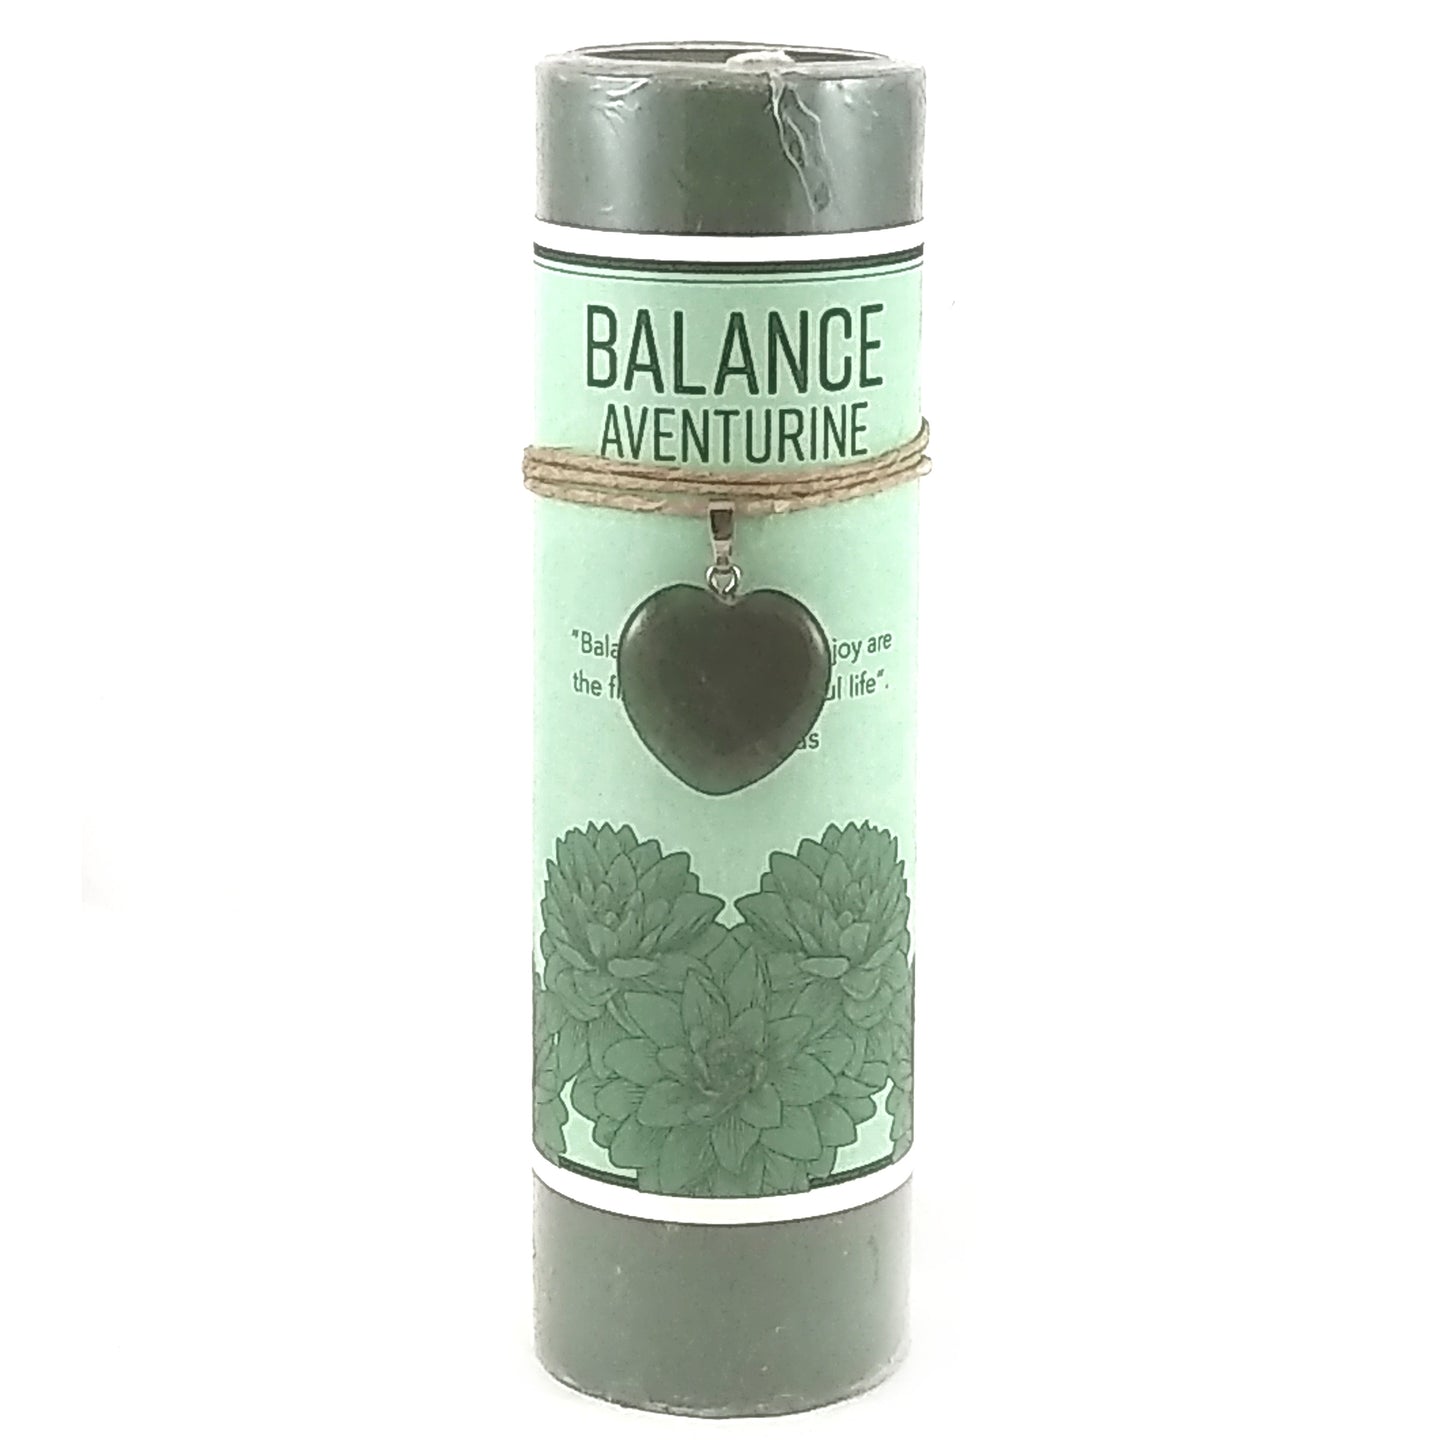 Crystal Heart Candle - Balance with Aventurine Pendant